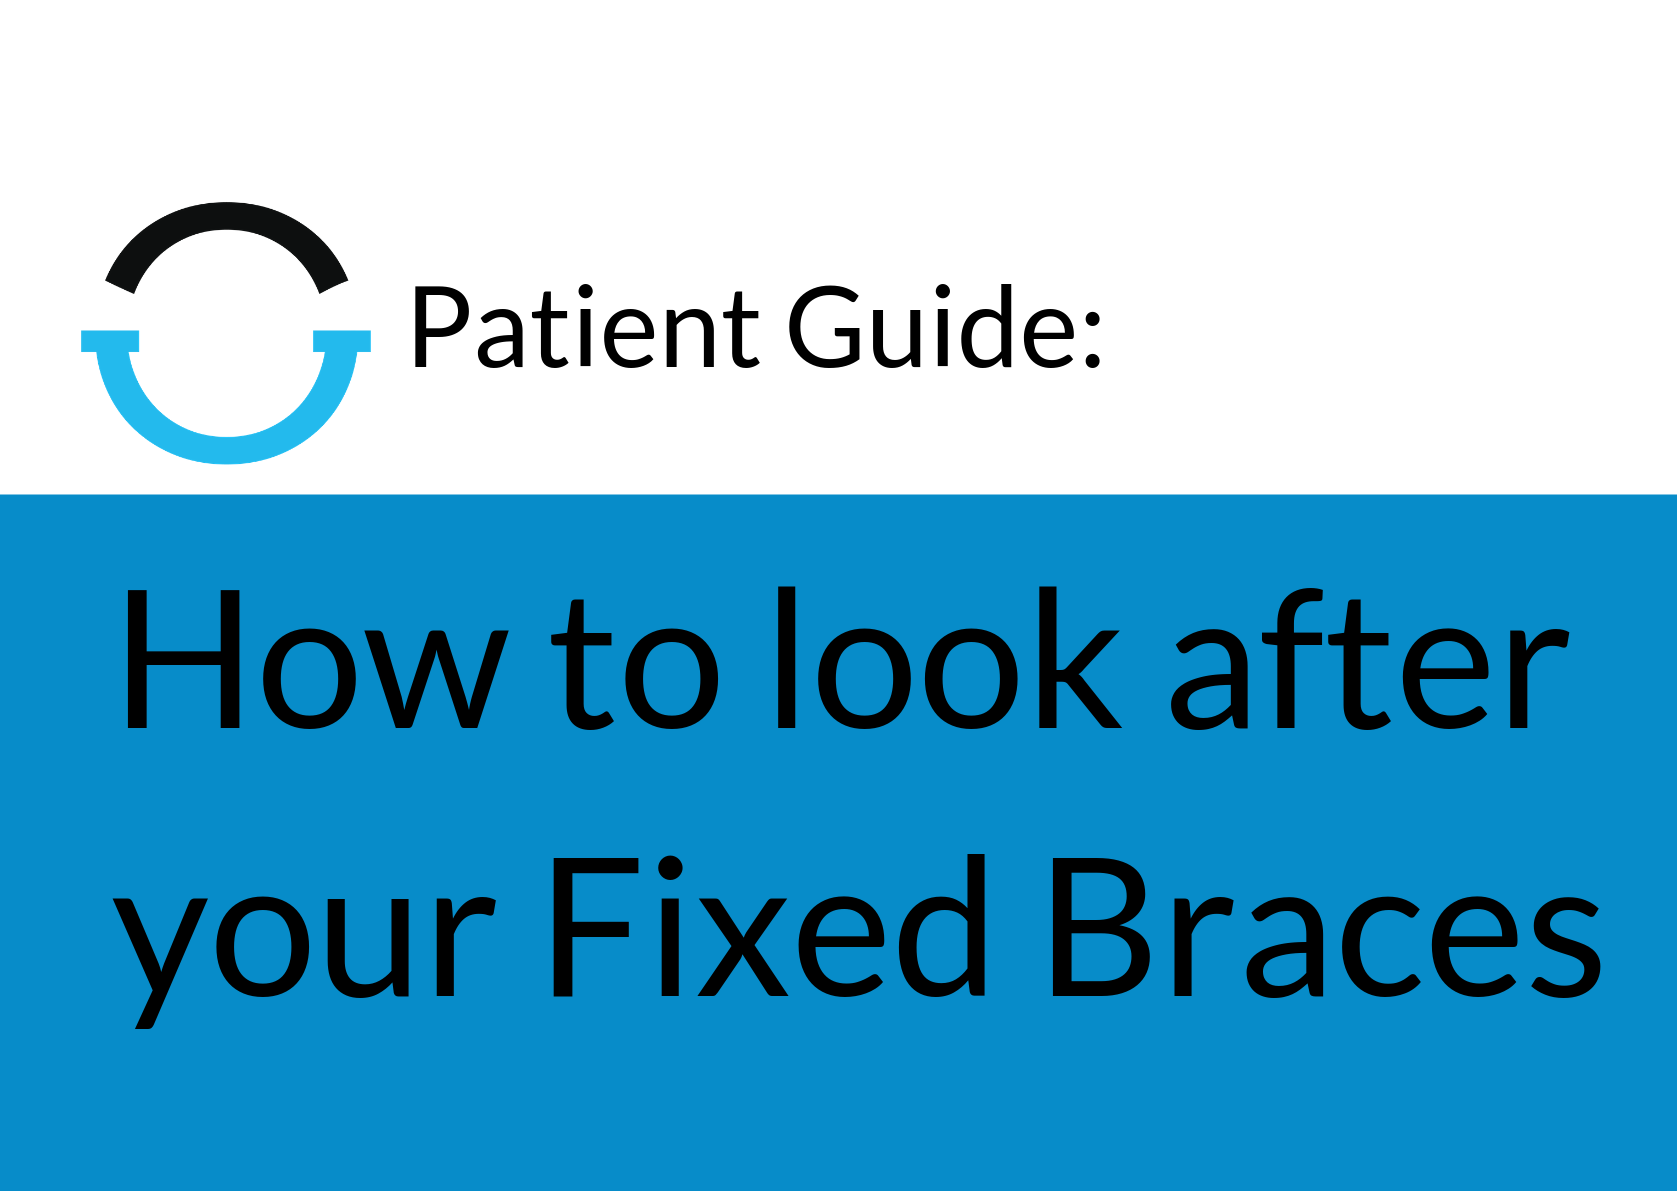 Patient Guide Header Image – How to look after your Fixed Braces LARGE